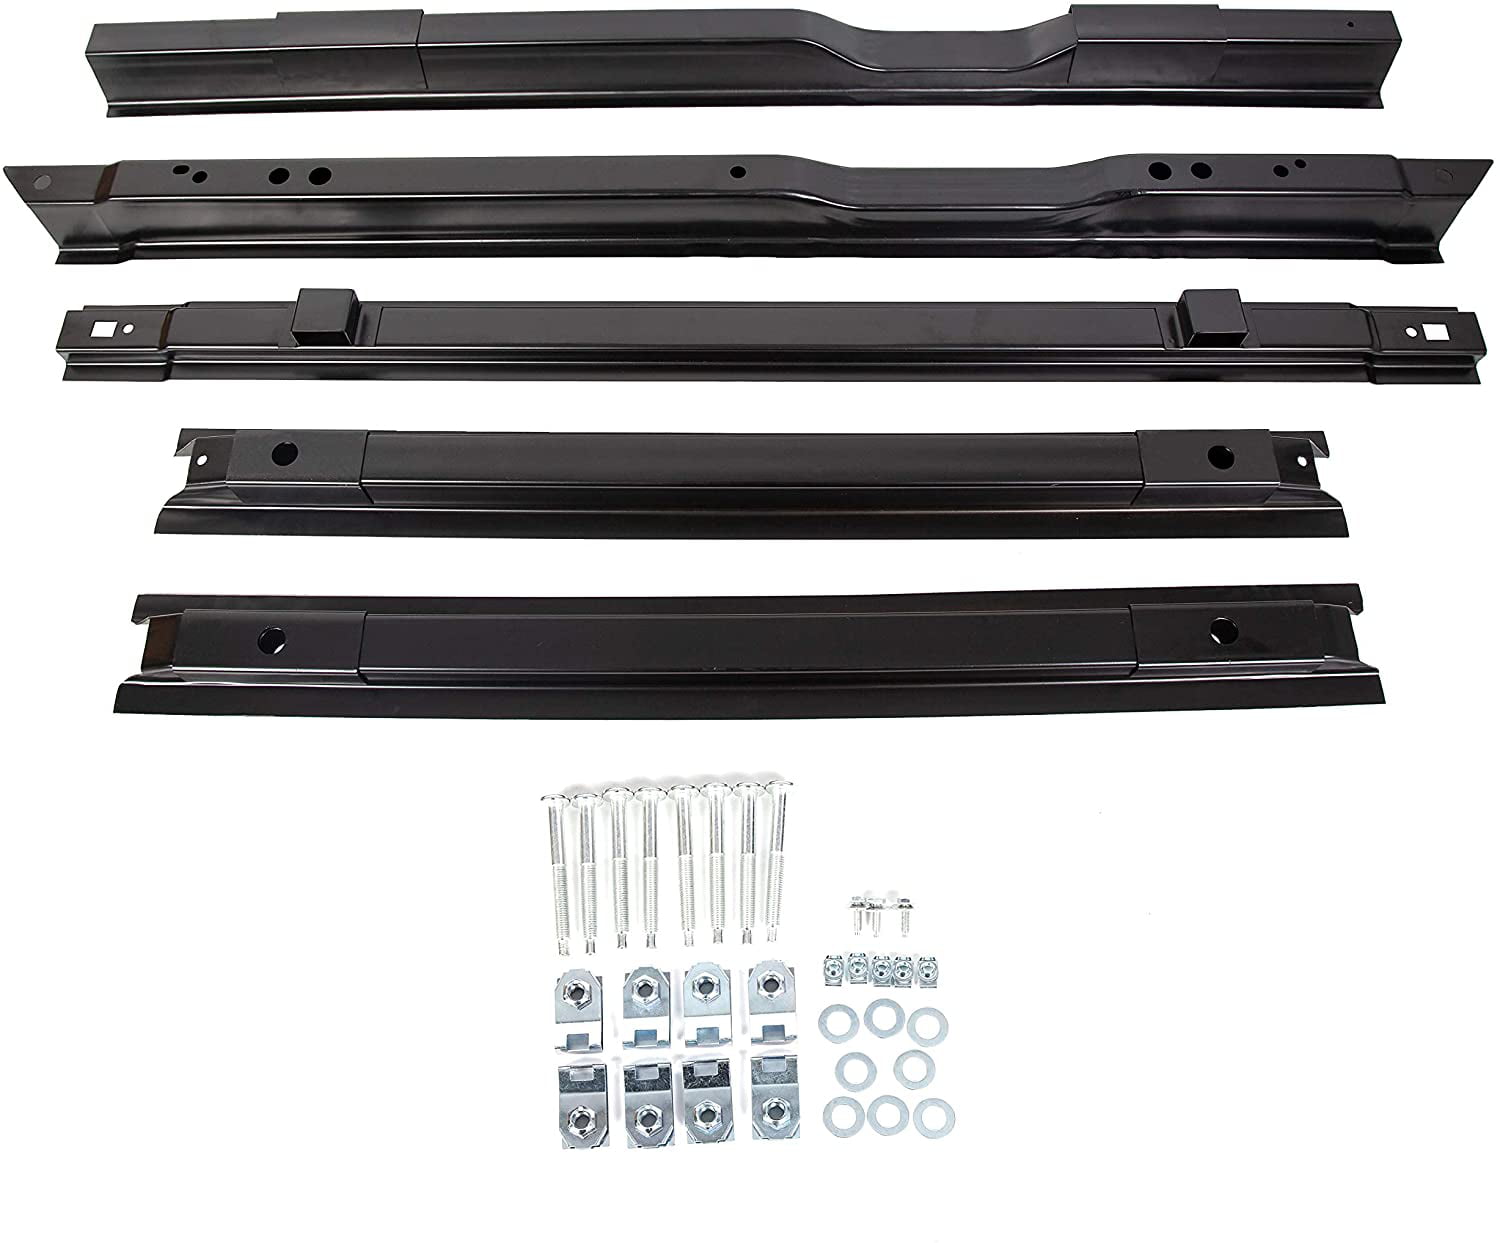 5x Rails Long Bed Truck Floor Support Crossmember 8 FT Bed Rebuilding Kit for 1999-2018 Ford F-250 F-350 F-450 Super Duty 926989 Mid Valley 